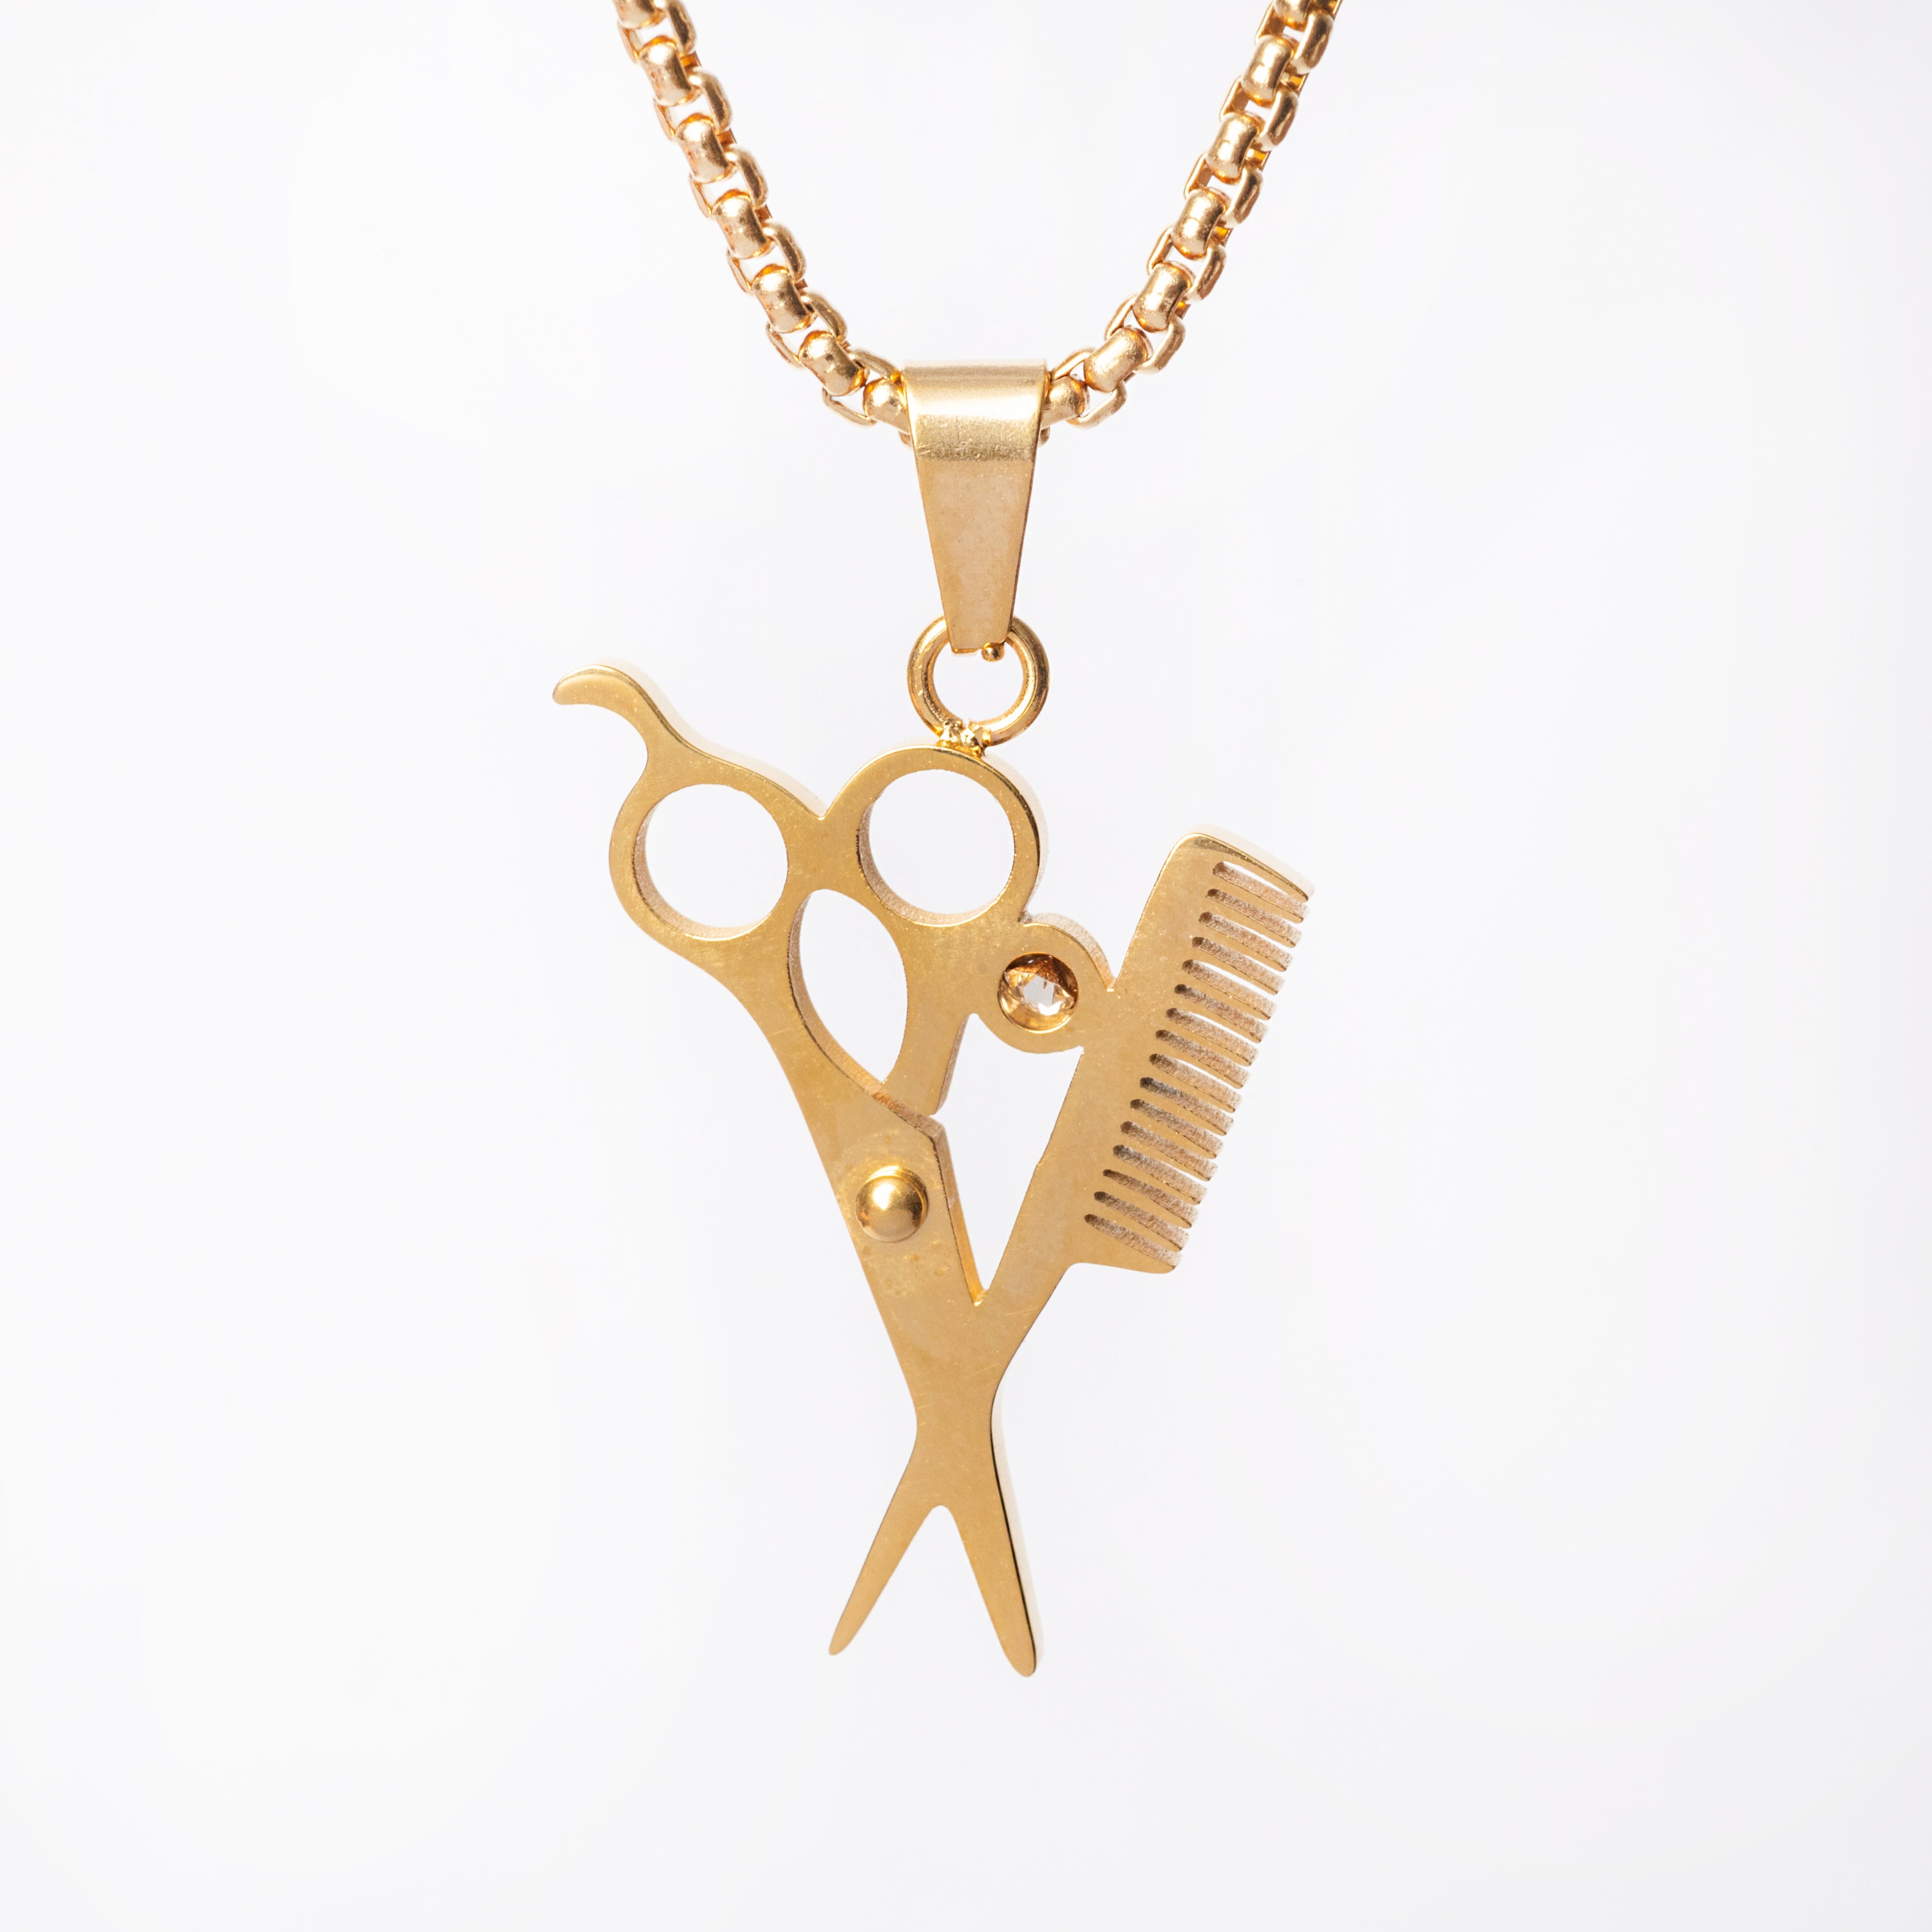 The Hairdresser Necklace